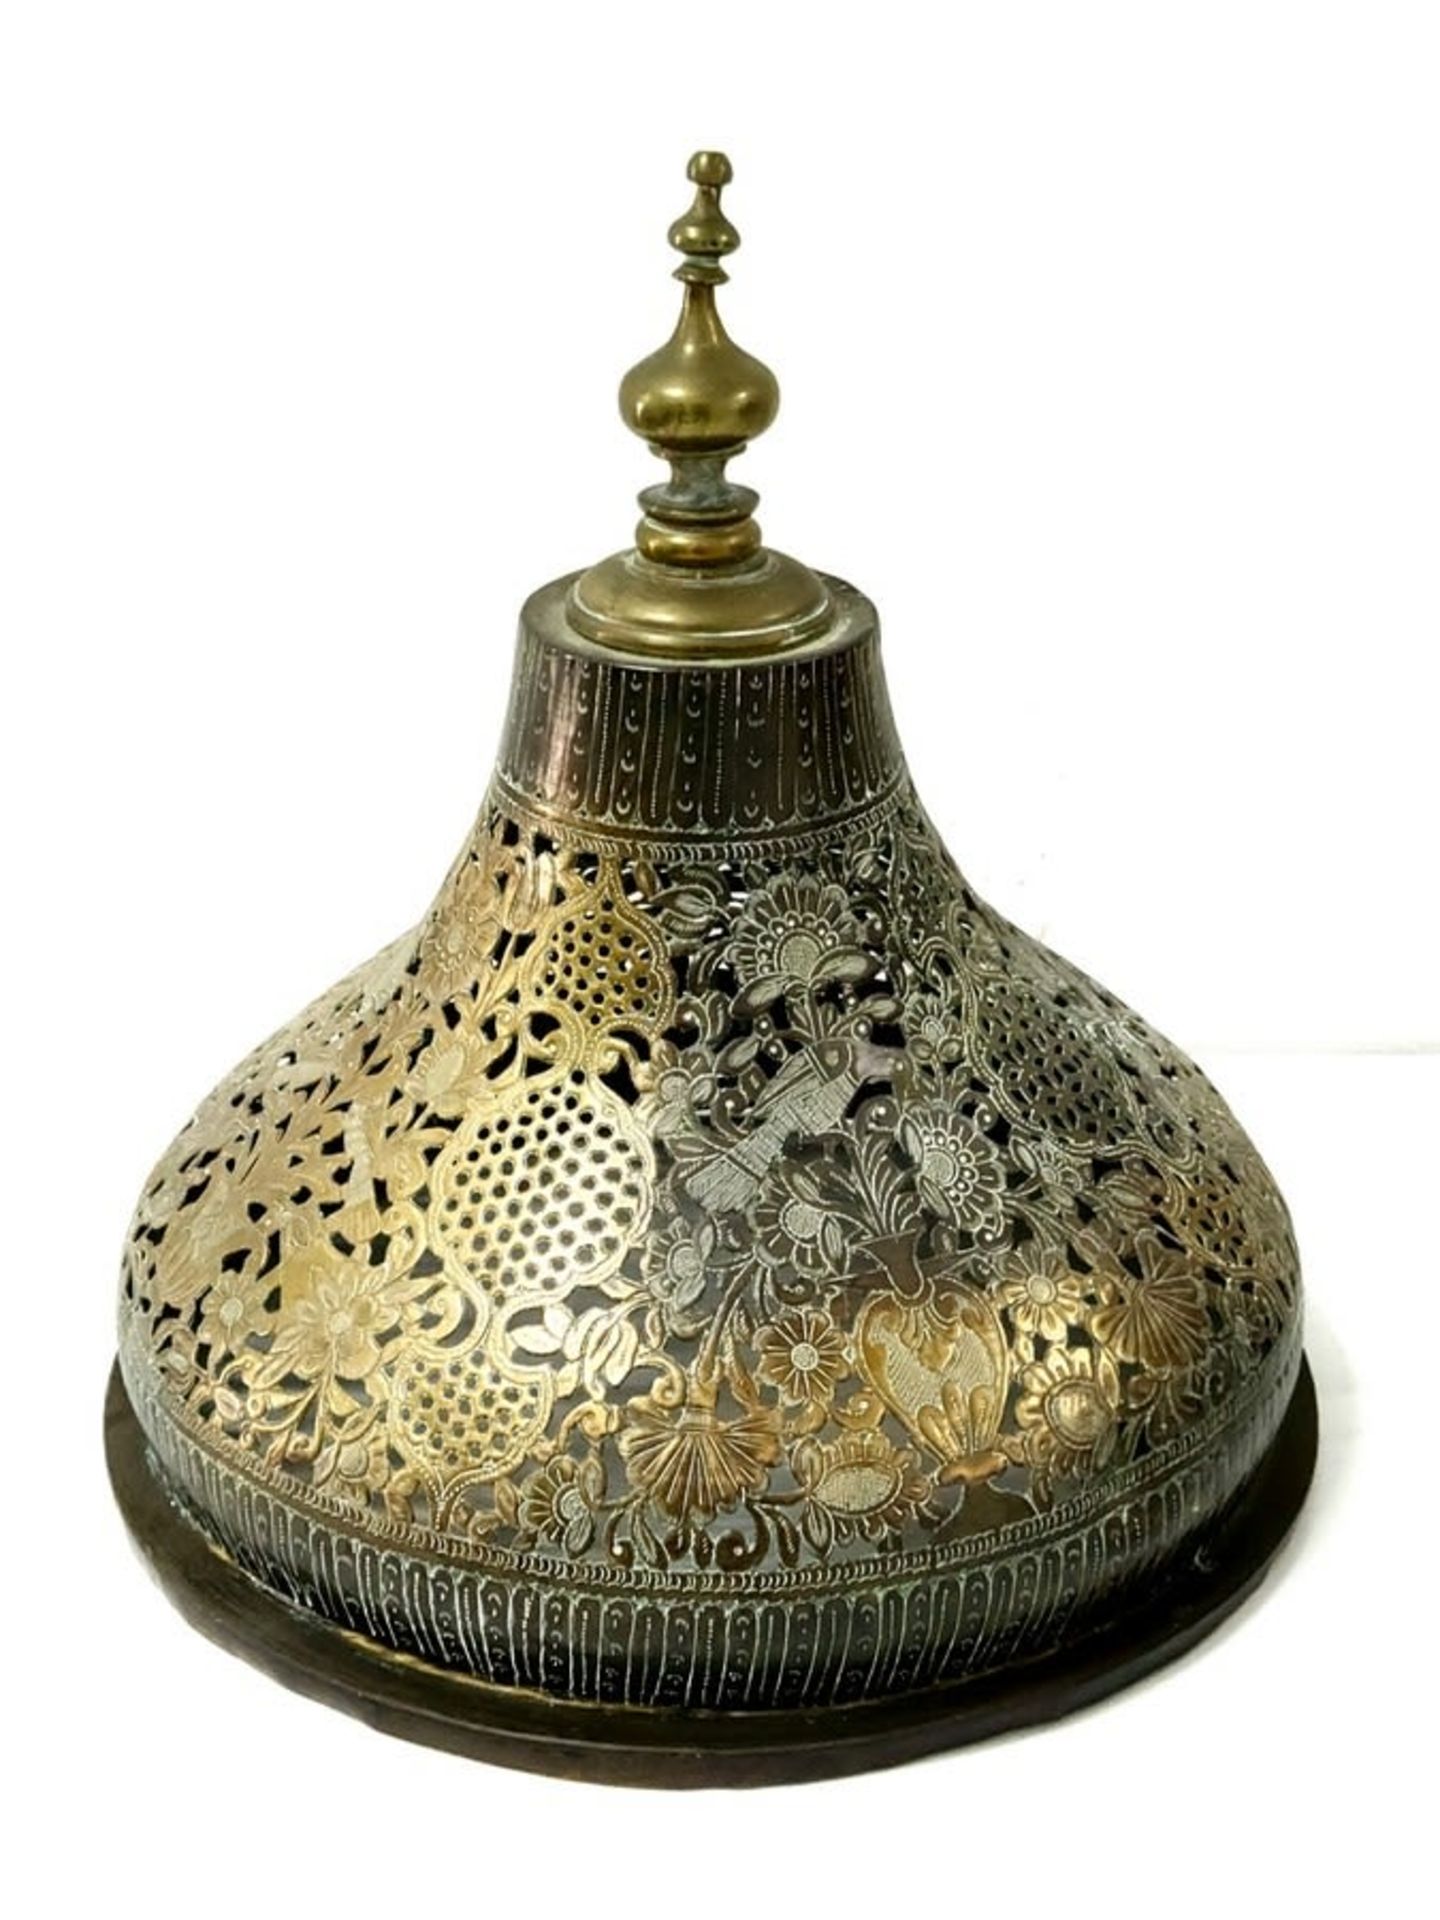 Impressive and high-quality antique Ottoman Turkish brazier, made of hammered and engraved sawn - Bild 5 aus 8